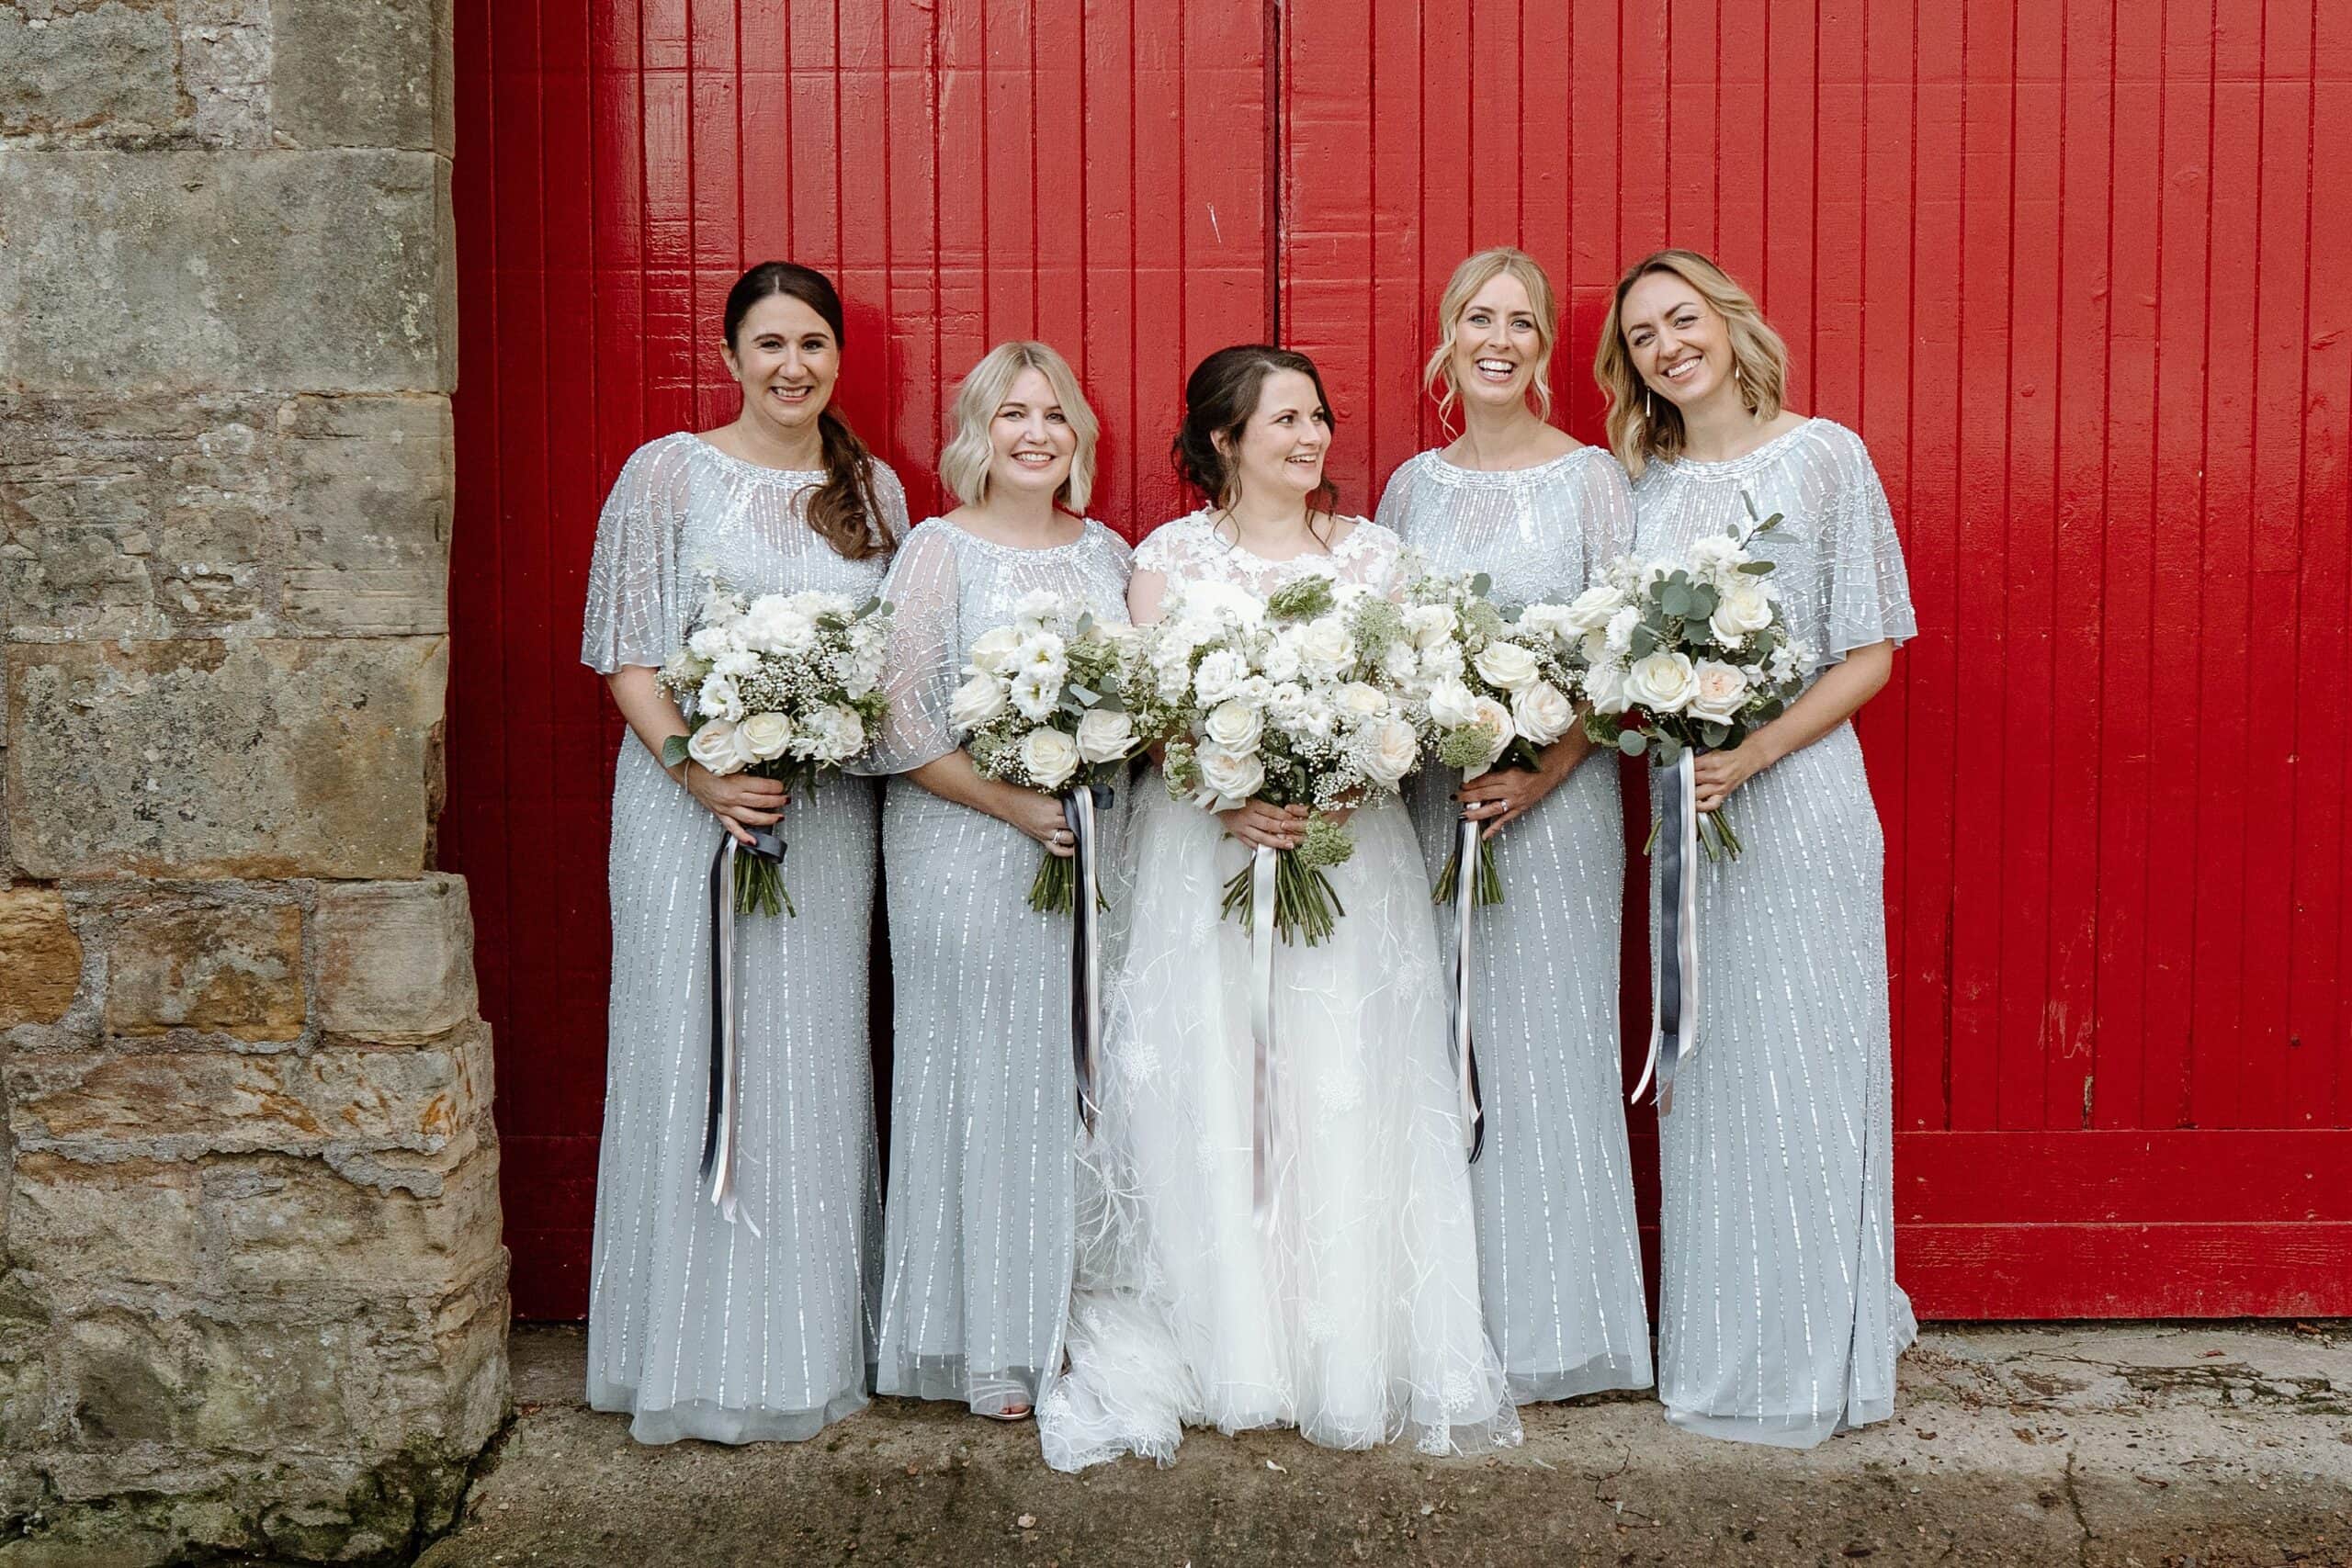 kinkell byre wedding photos of bride and bridesmaids outside venue with red barn doors in background at st andrews wedding venue